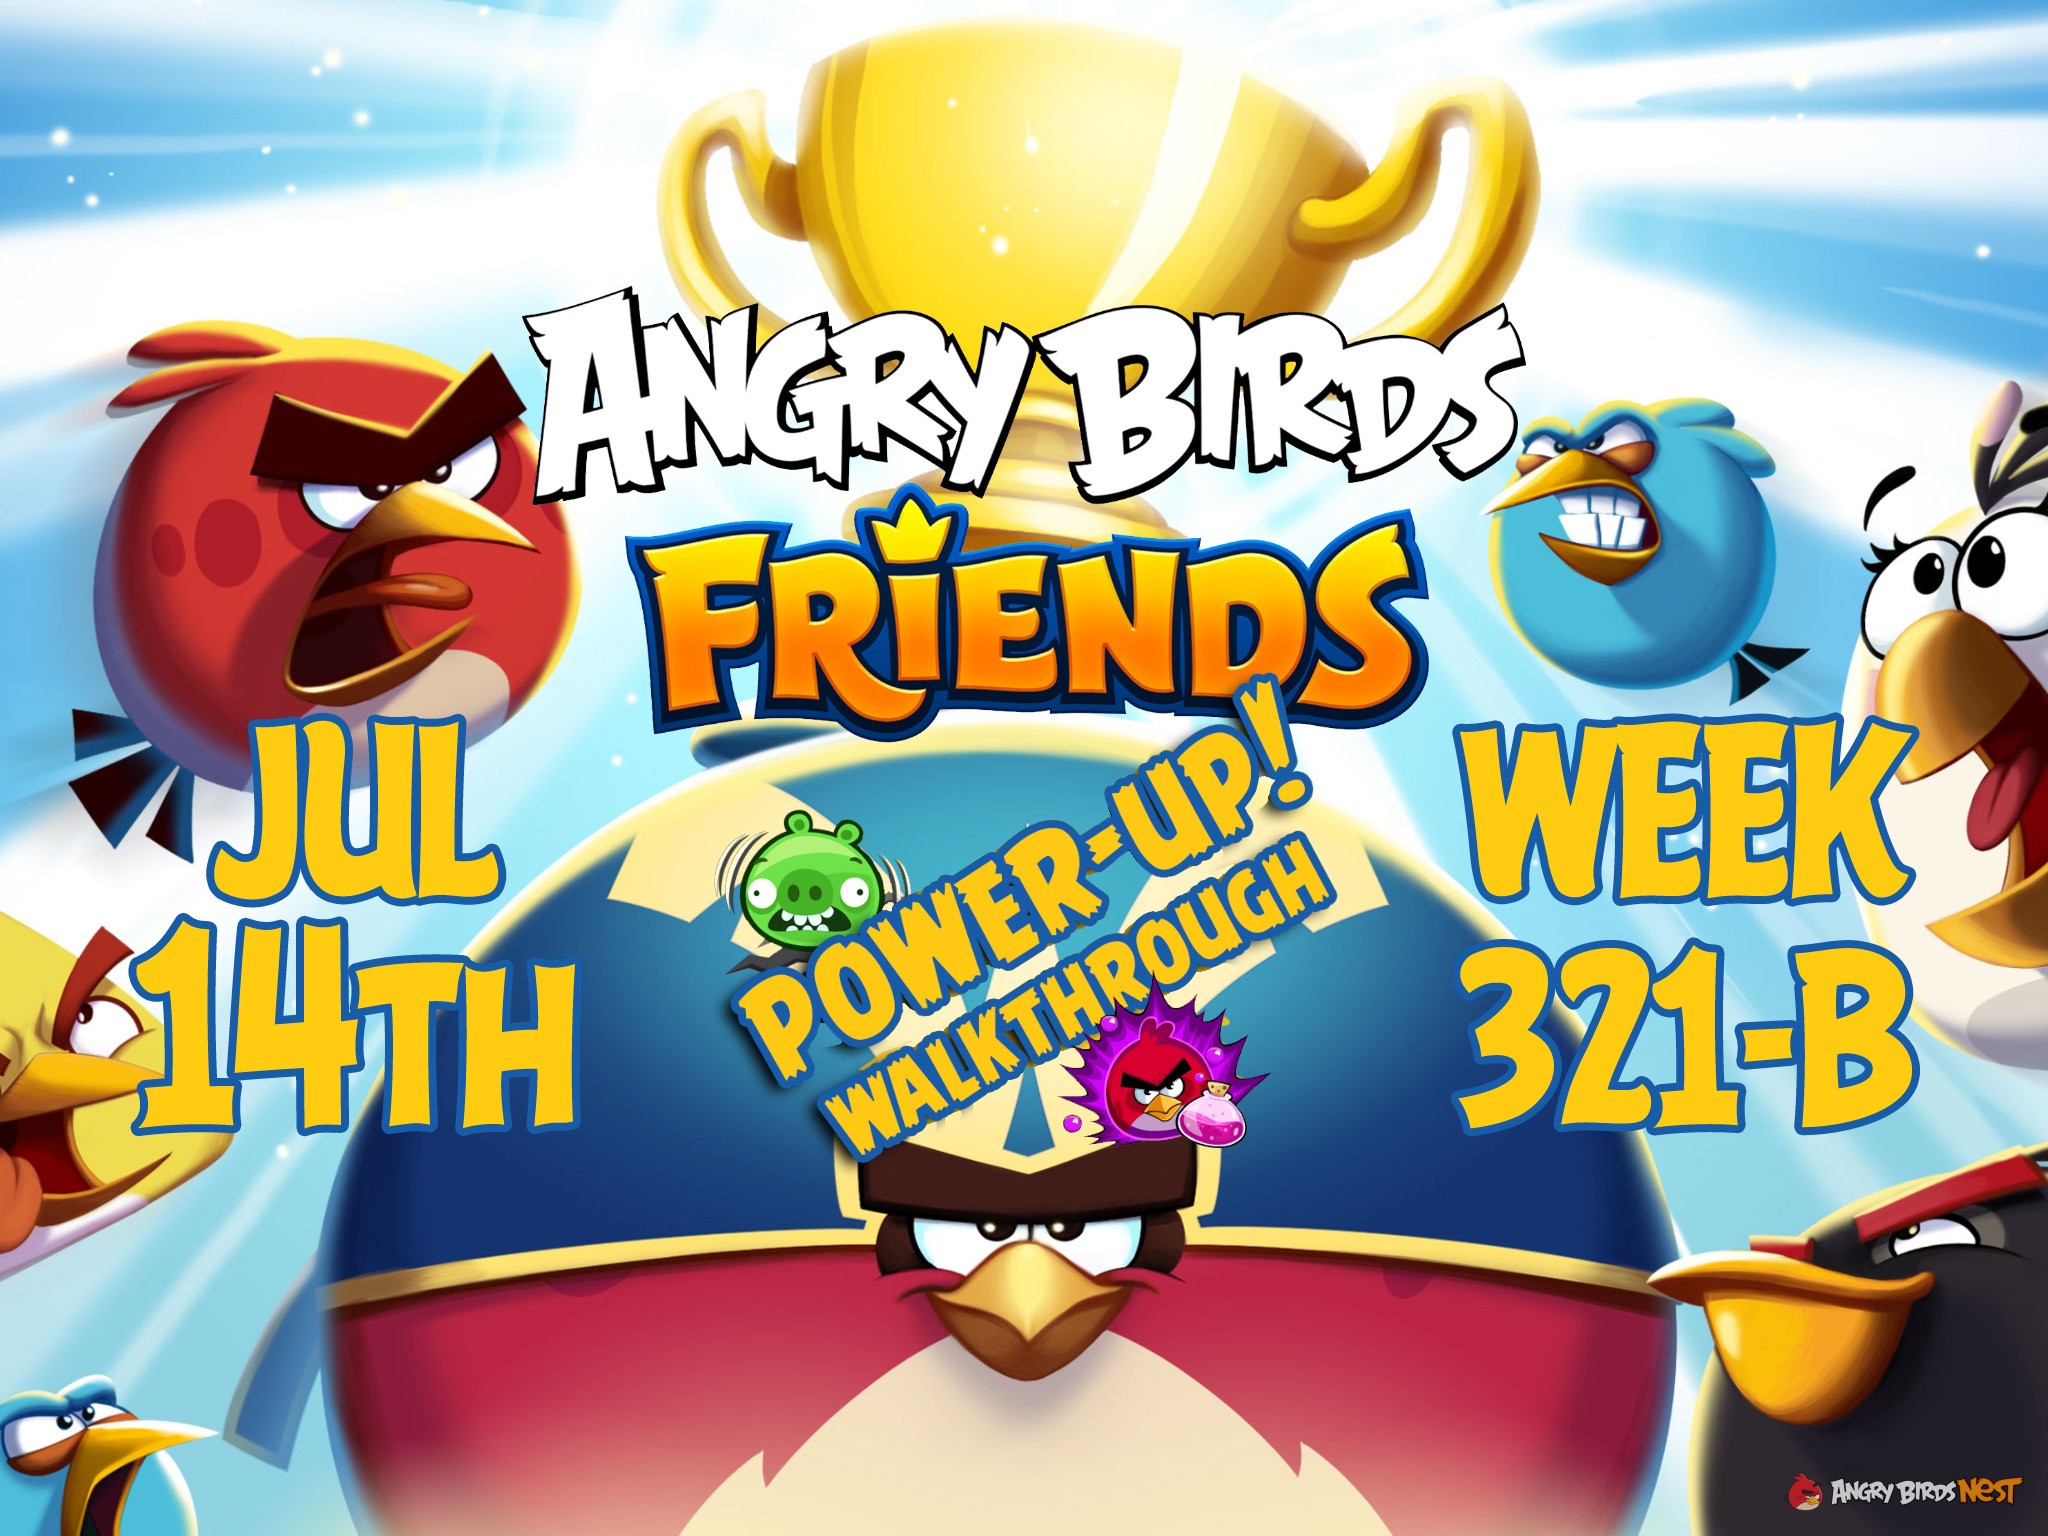 Angry-Birds-Friends-Tournament-Week-321-B-Feature-Image-PU